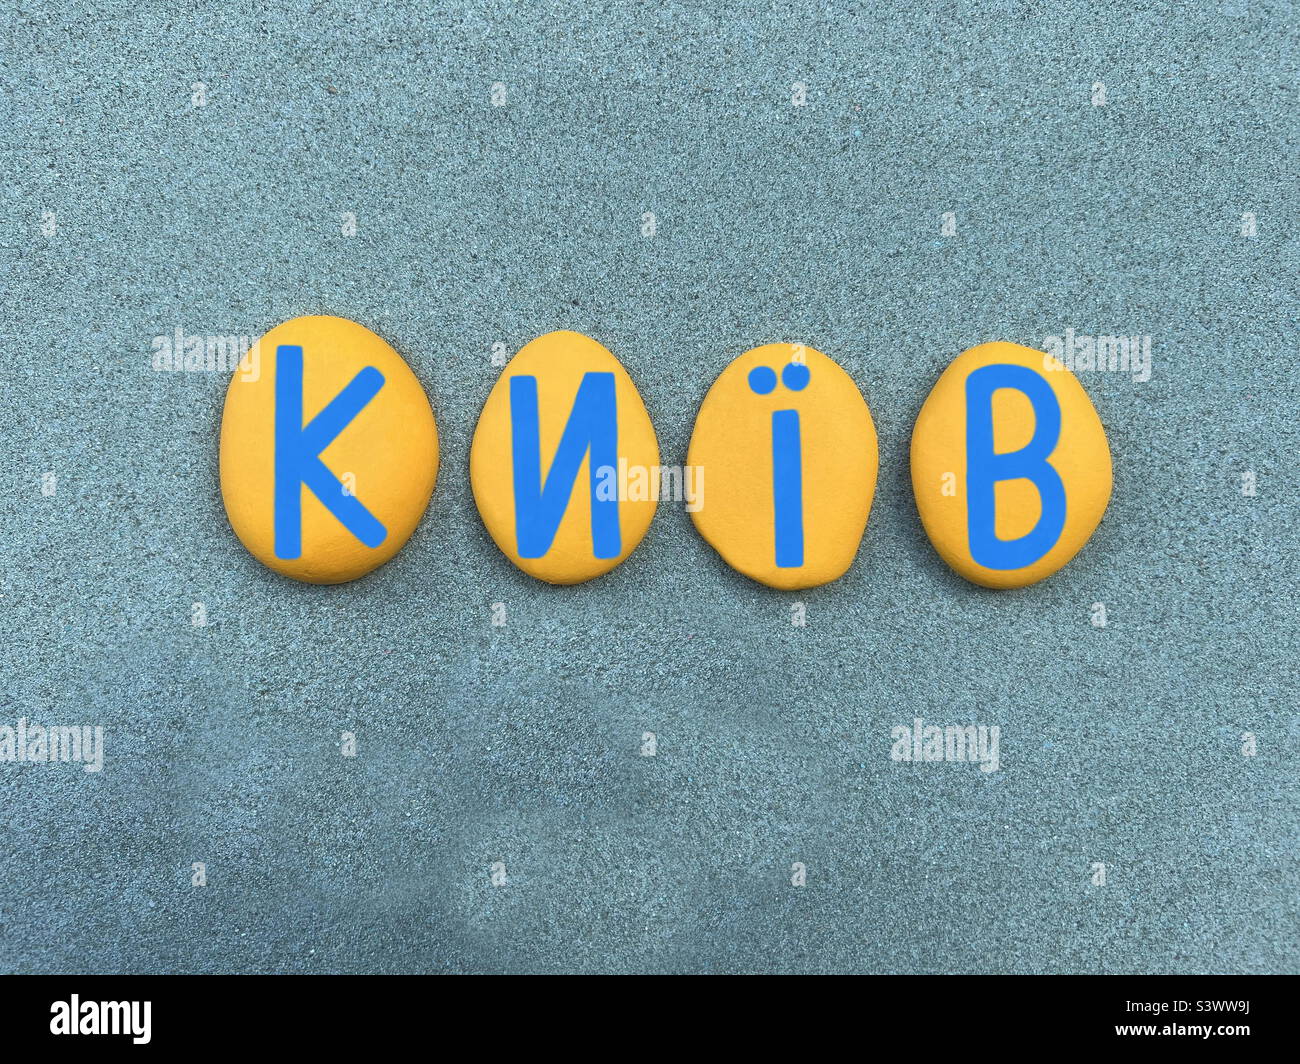 Kiev, capitol of Ukraine composed with yellow and blue hand painted stone Ukrainian letters over green sand Stock Photo